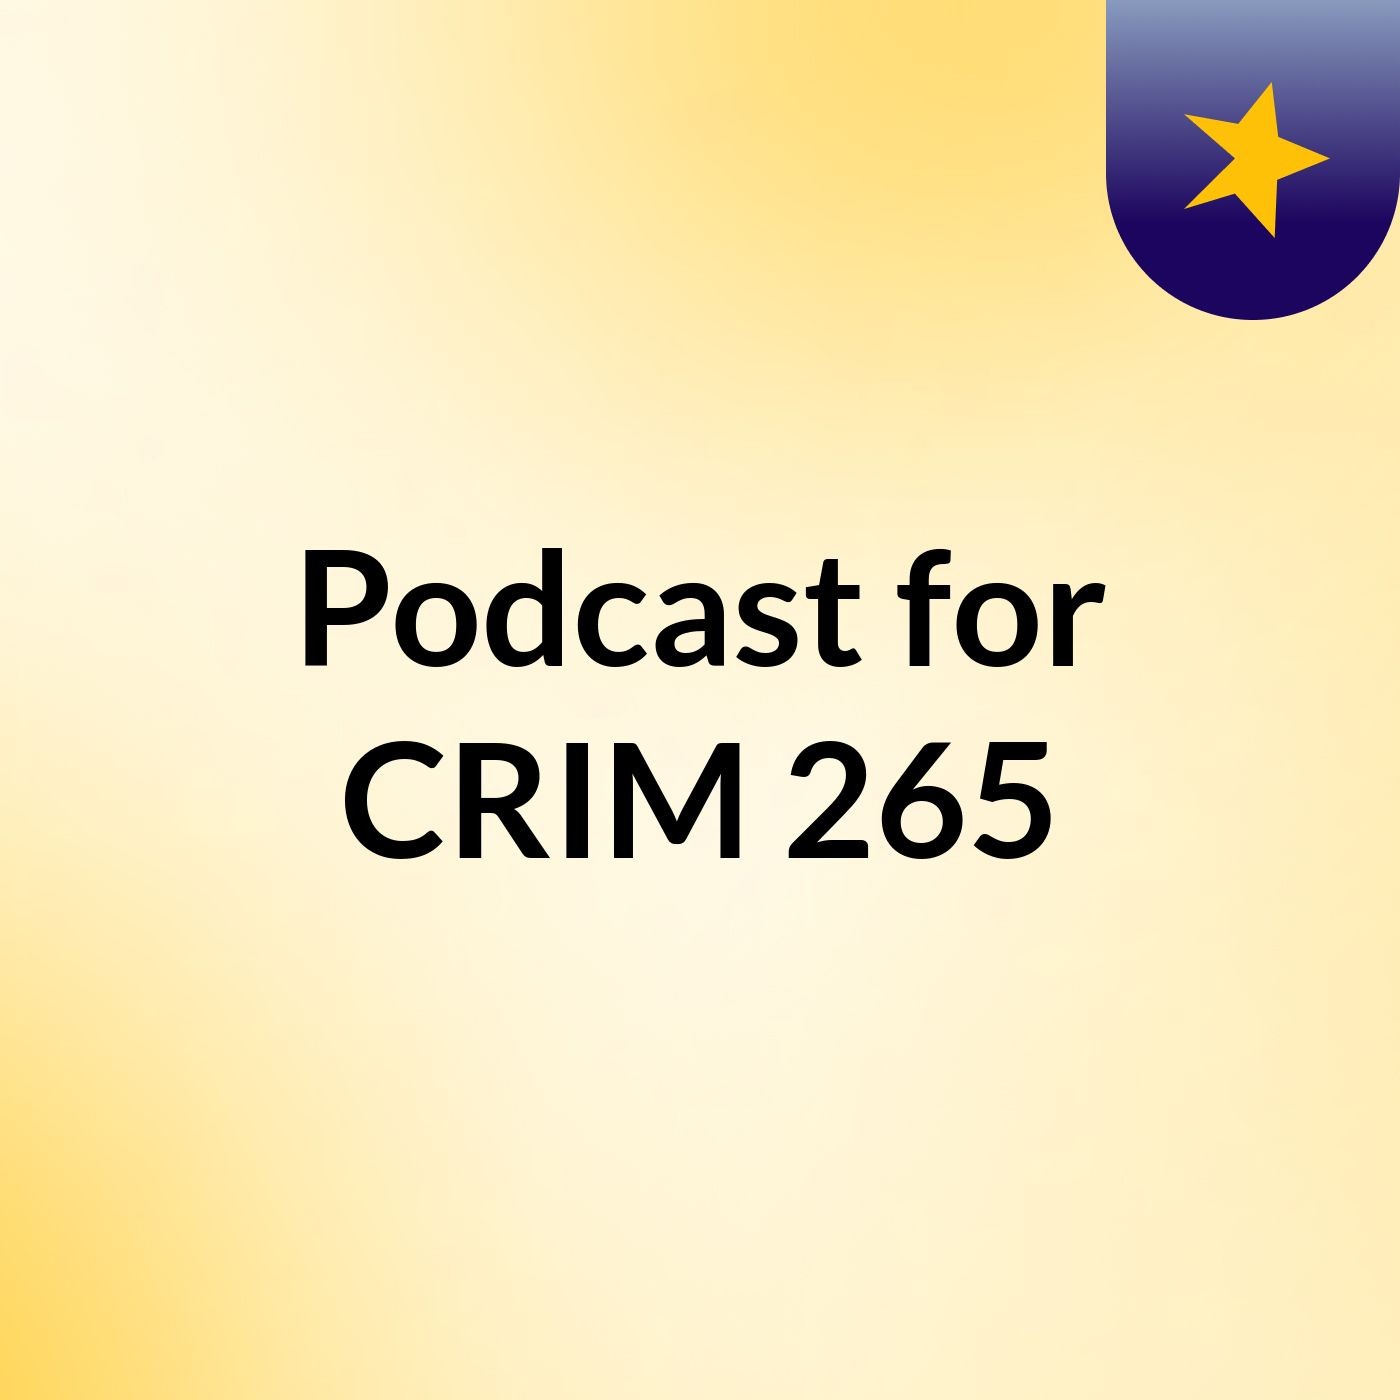 Podcast for Crim 265 part II